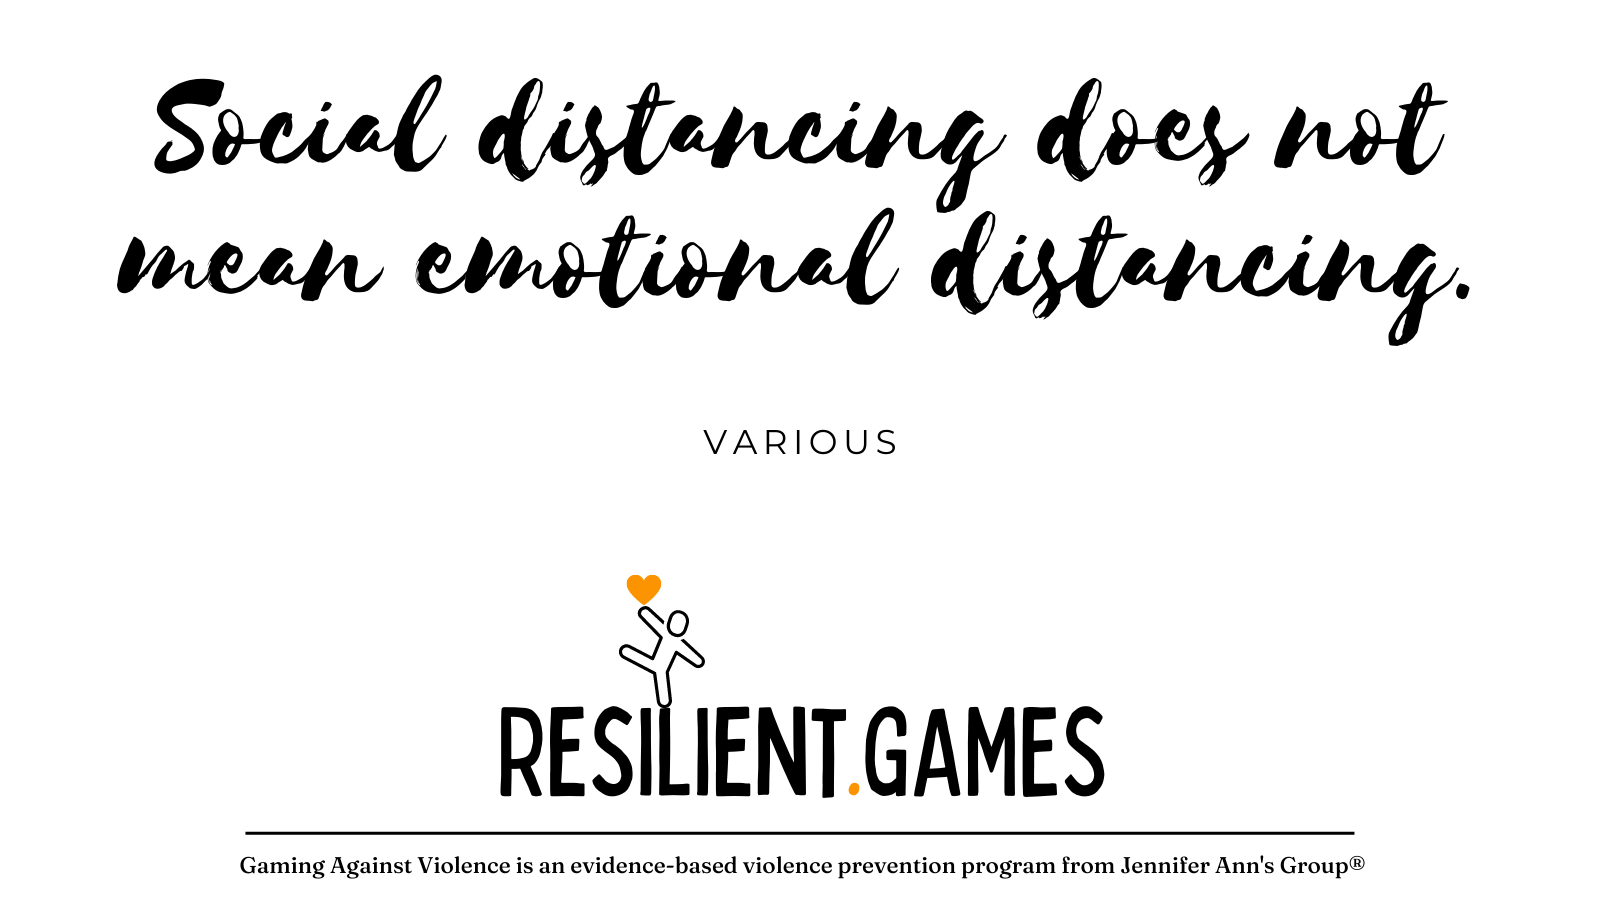 A quote: Social distancing does not mean emotional distancing.